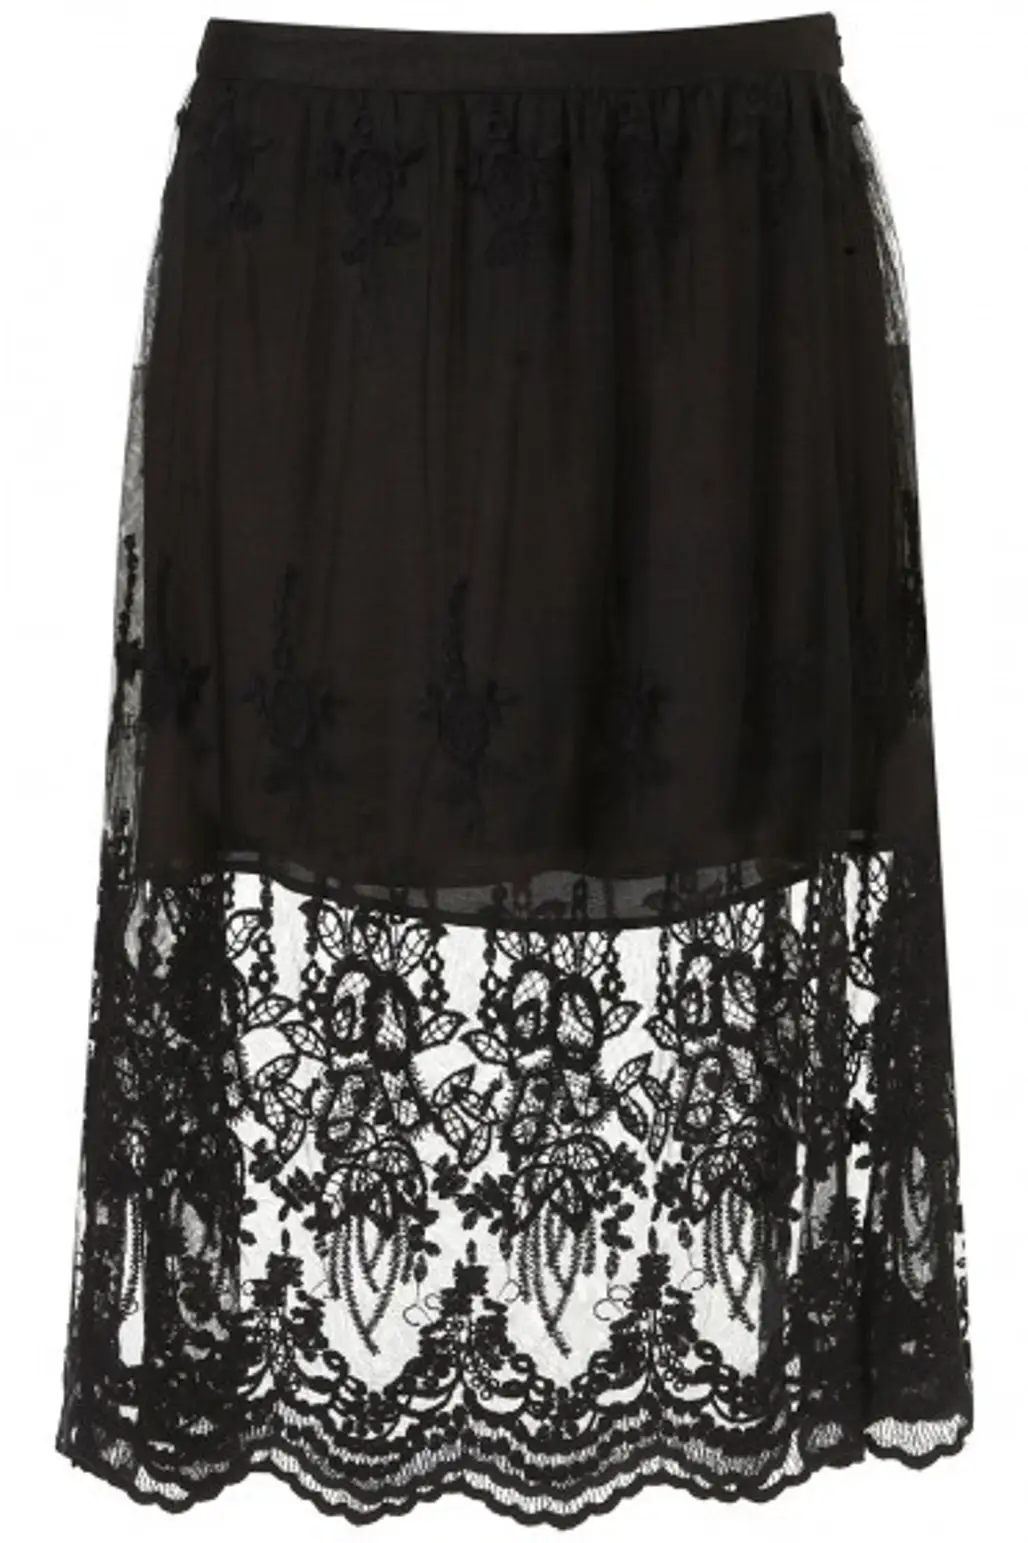 Topshop Black Embroidered Lace Skirt